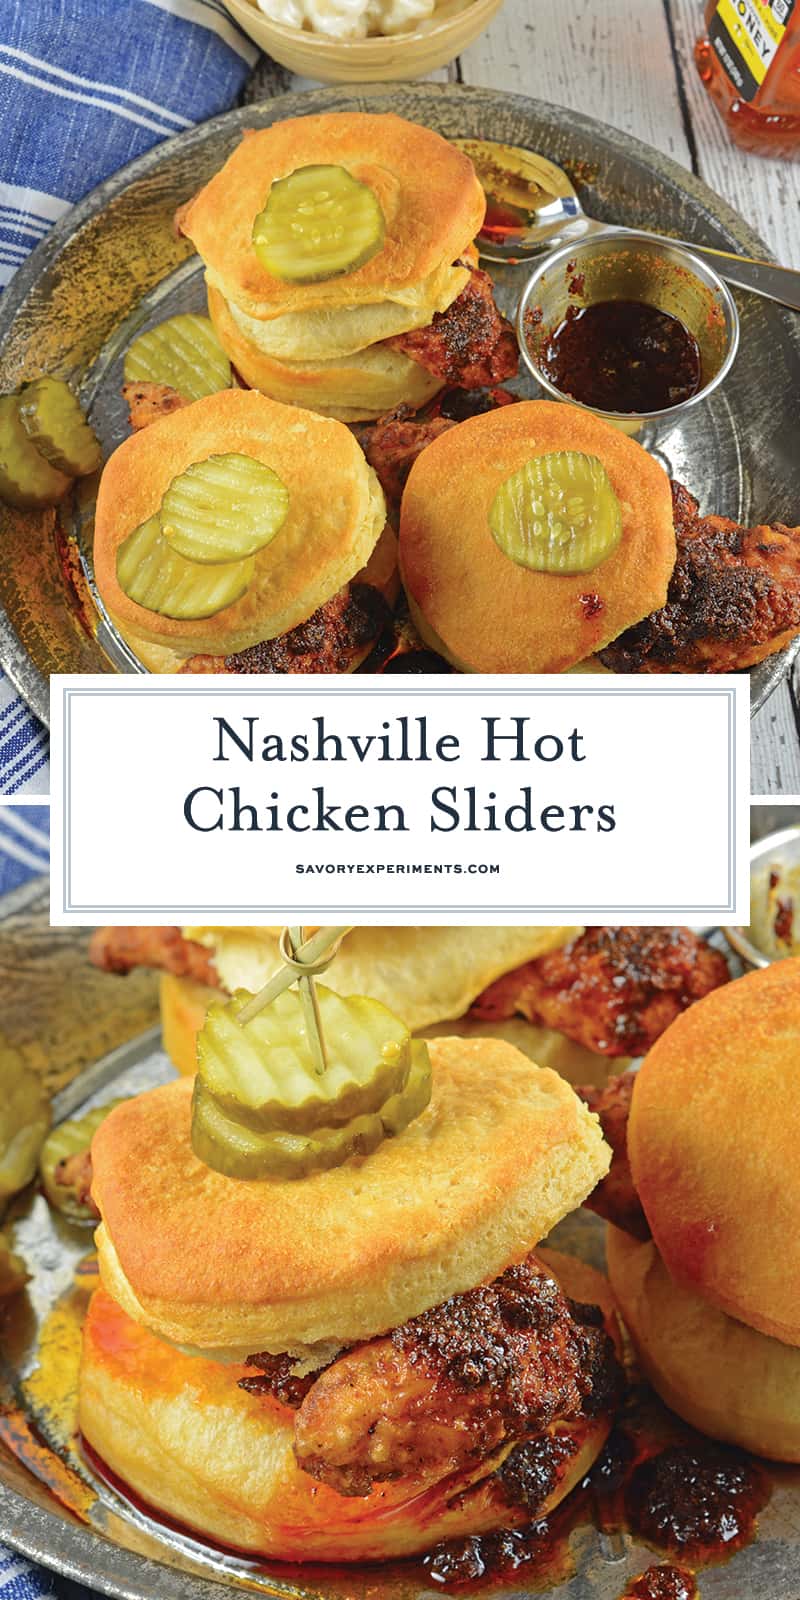 Nashville Hot Chicken Sliders are perfect as a dinner or appetizer. Crispy fried chicken dredged in spicy sauce served on buttermilk biscuits with honey habanero pickles. #nashvillehotchicken #sliderrecipes www.savoryexperiments.com